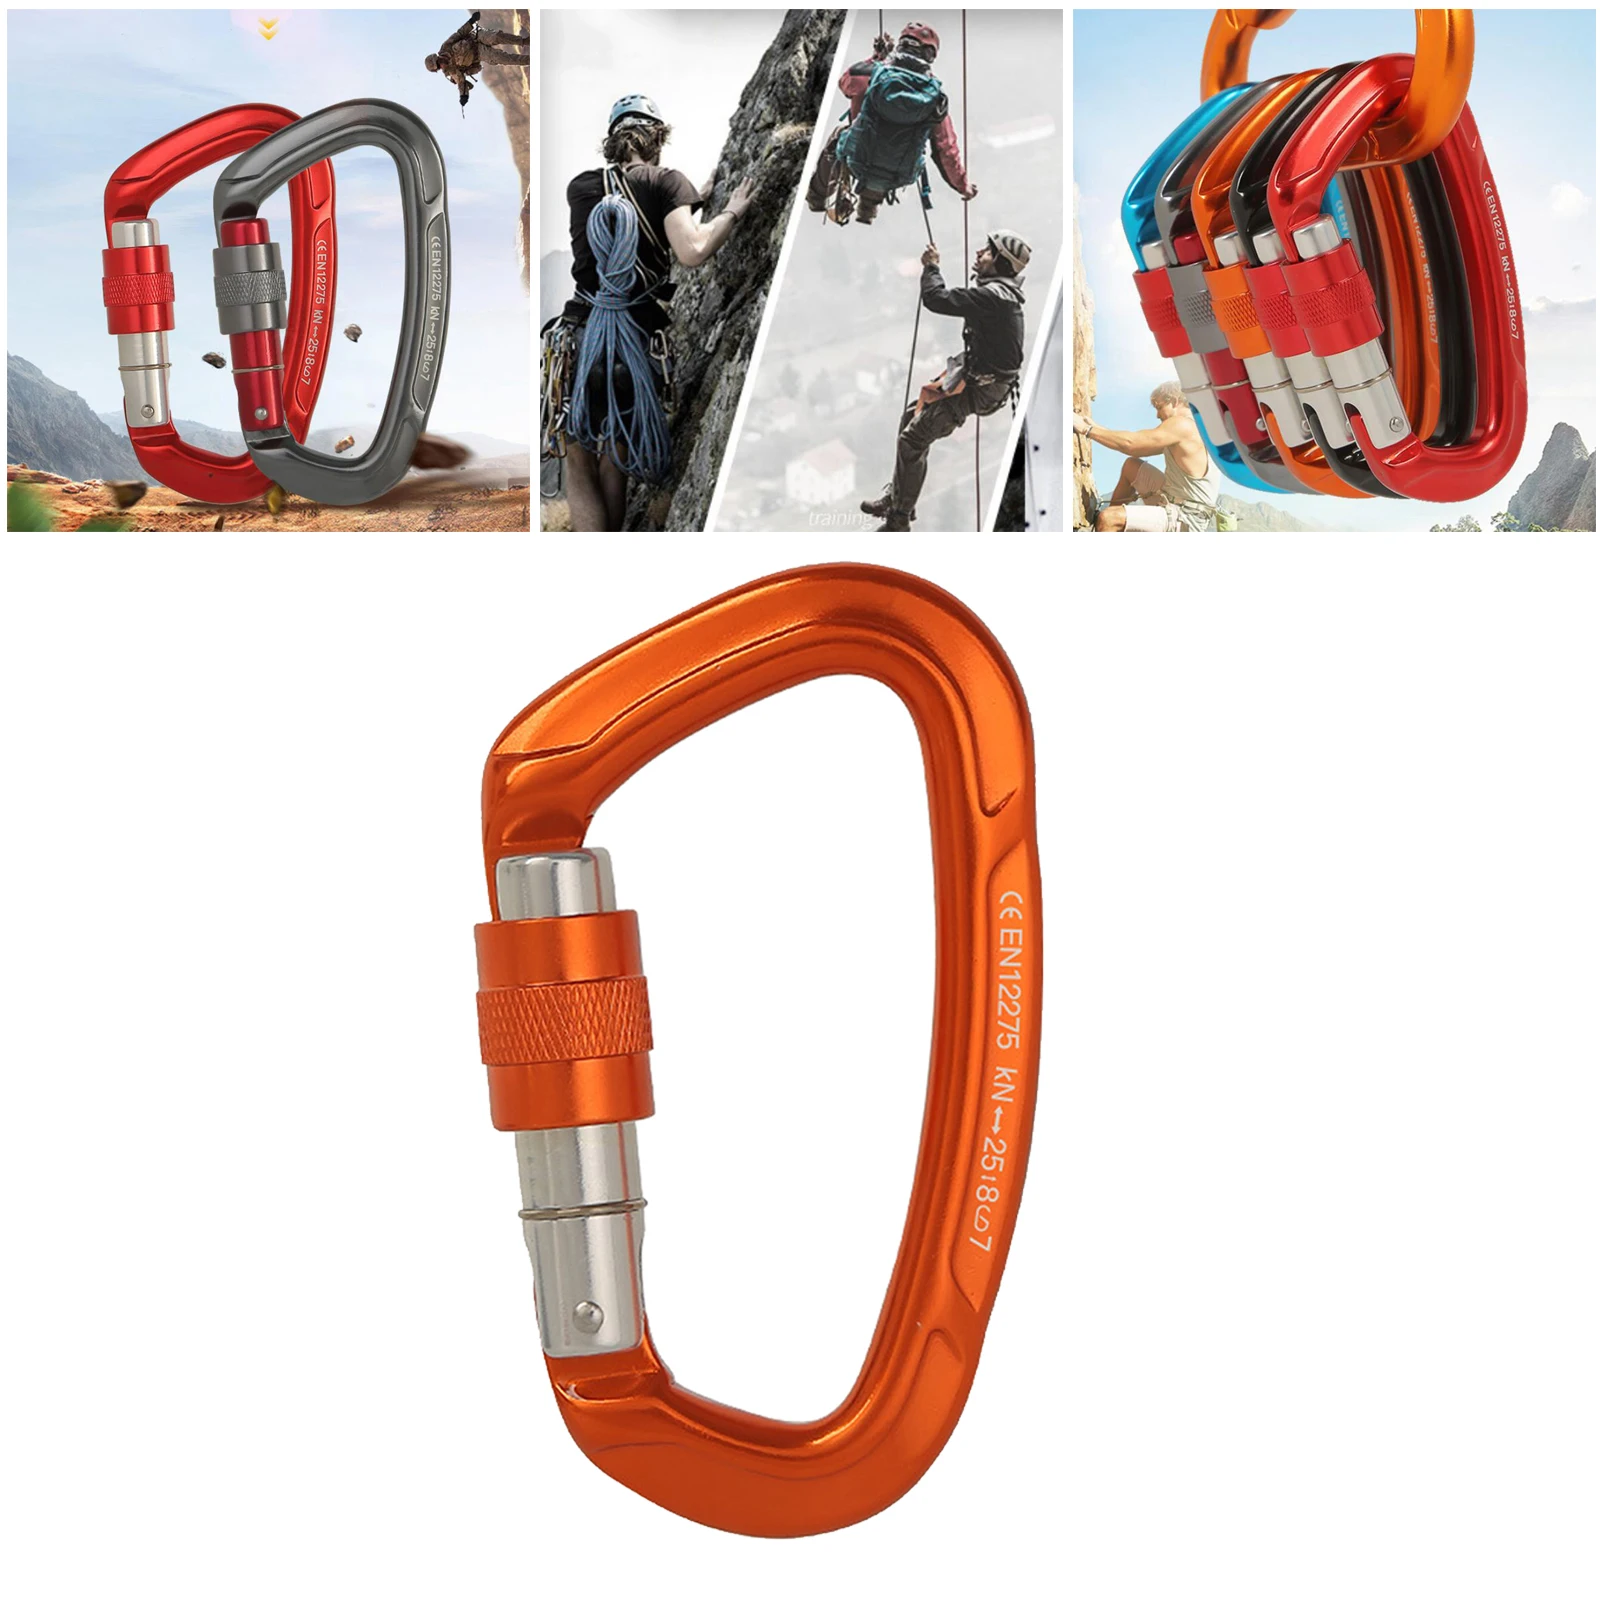 Climbing Carabiner Clips D-shape Carabiners Dog Leash Rescuing Safety Gear